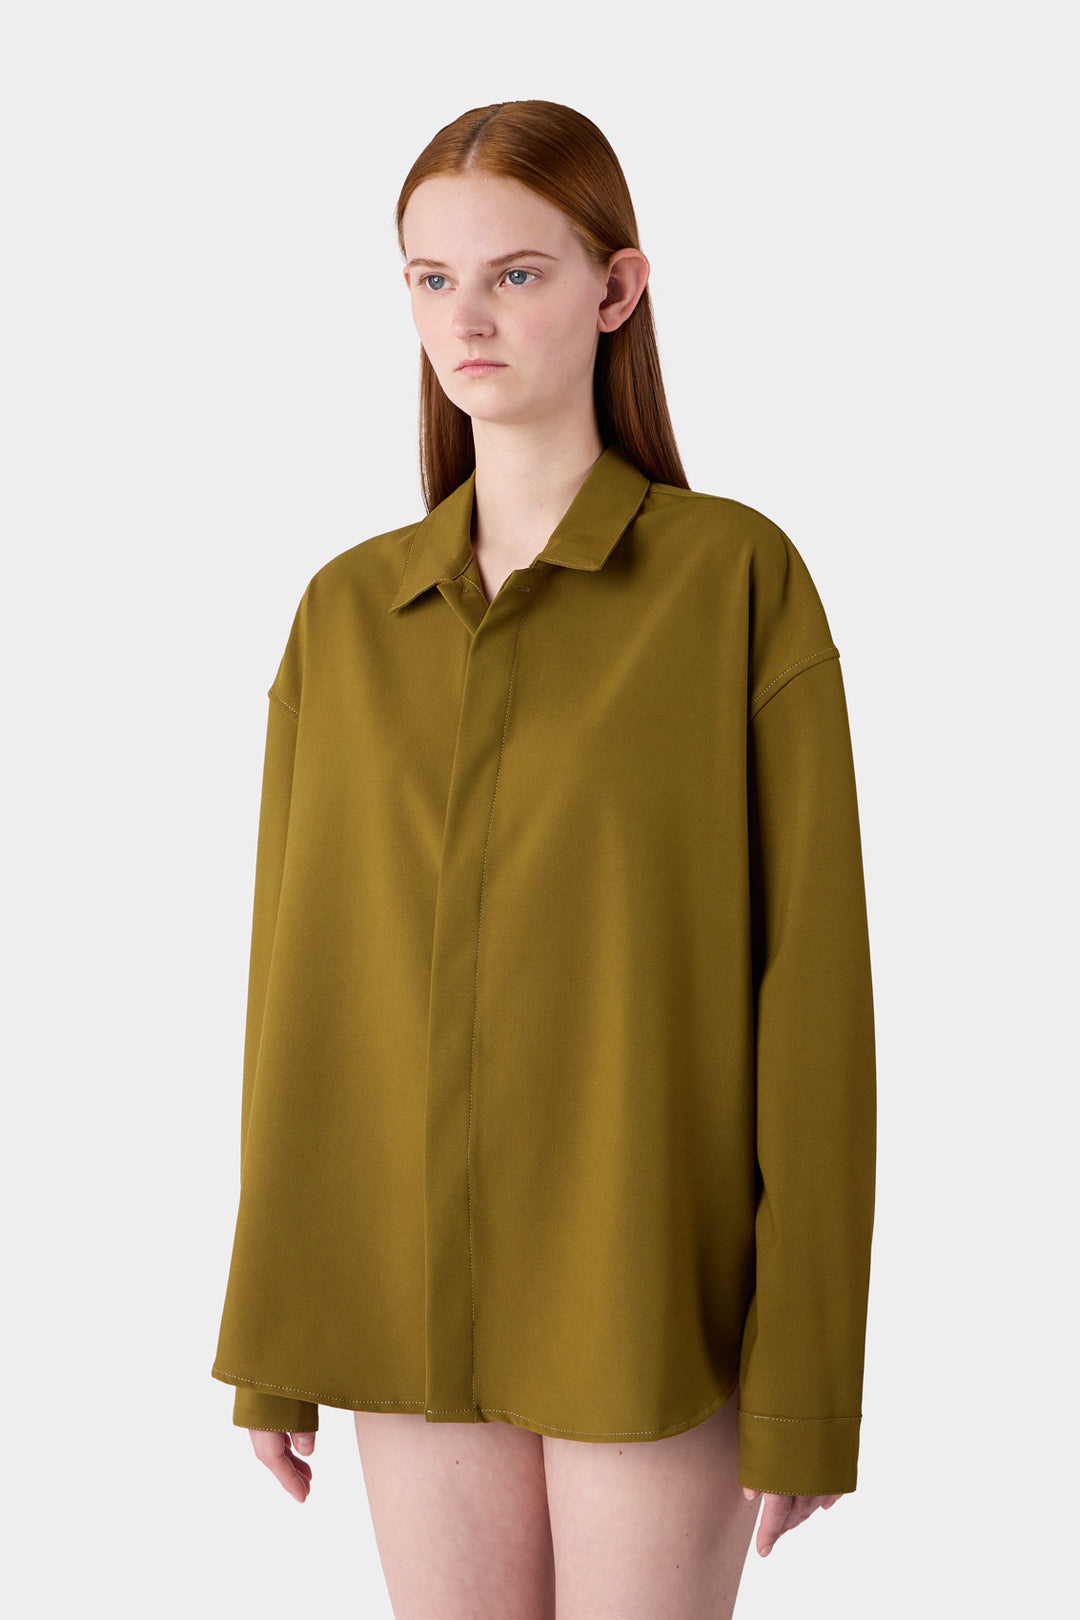 OVER SHIRT / olive green - 3